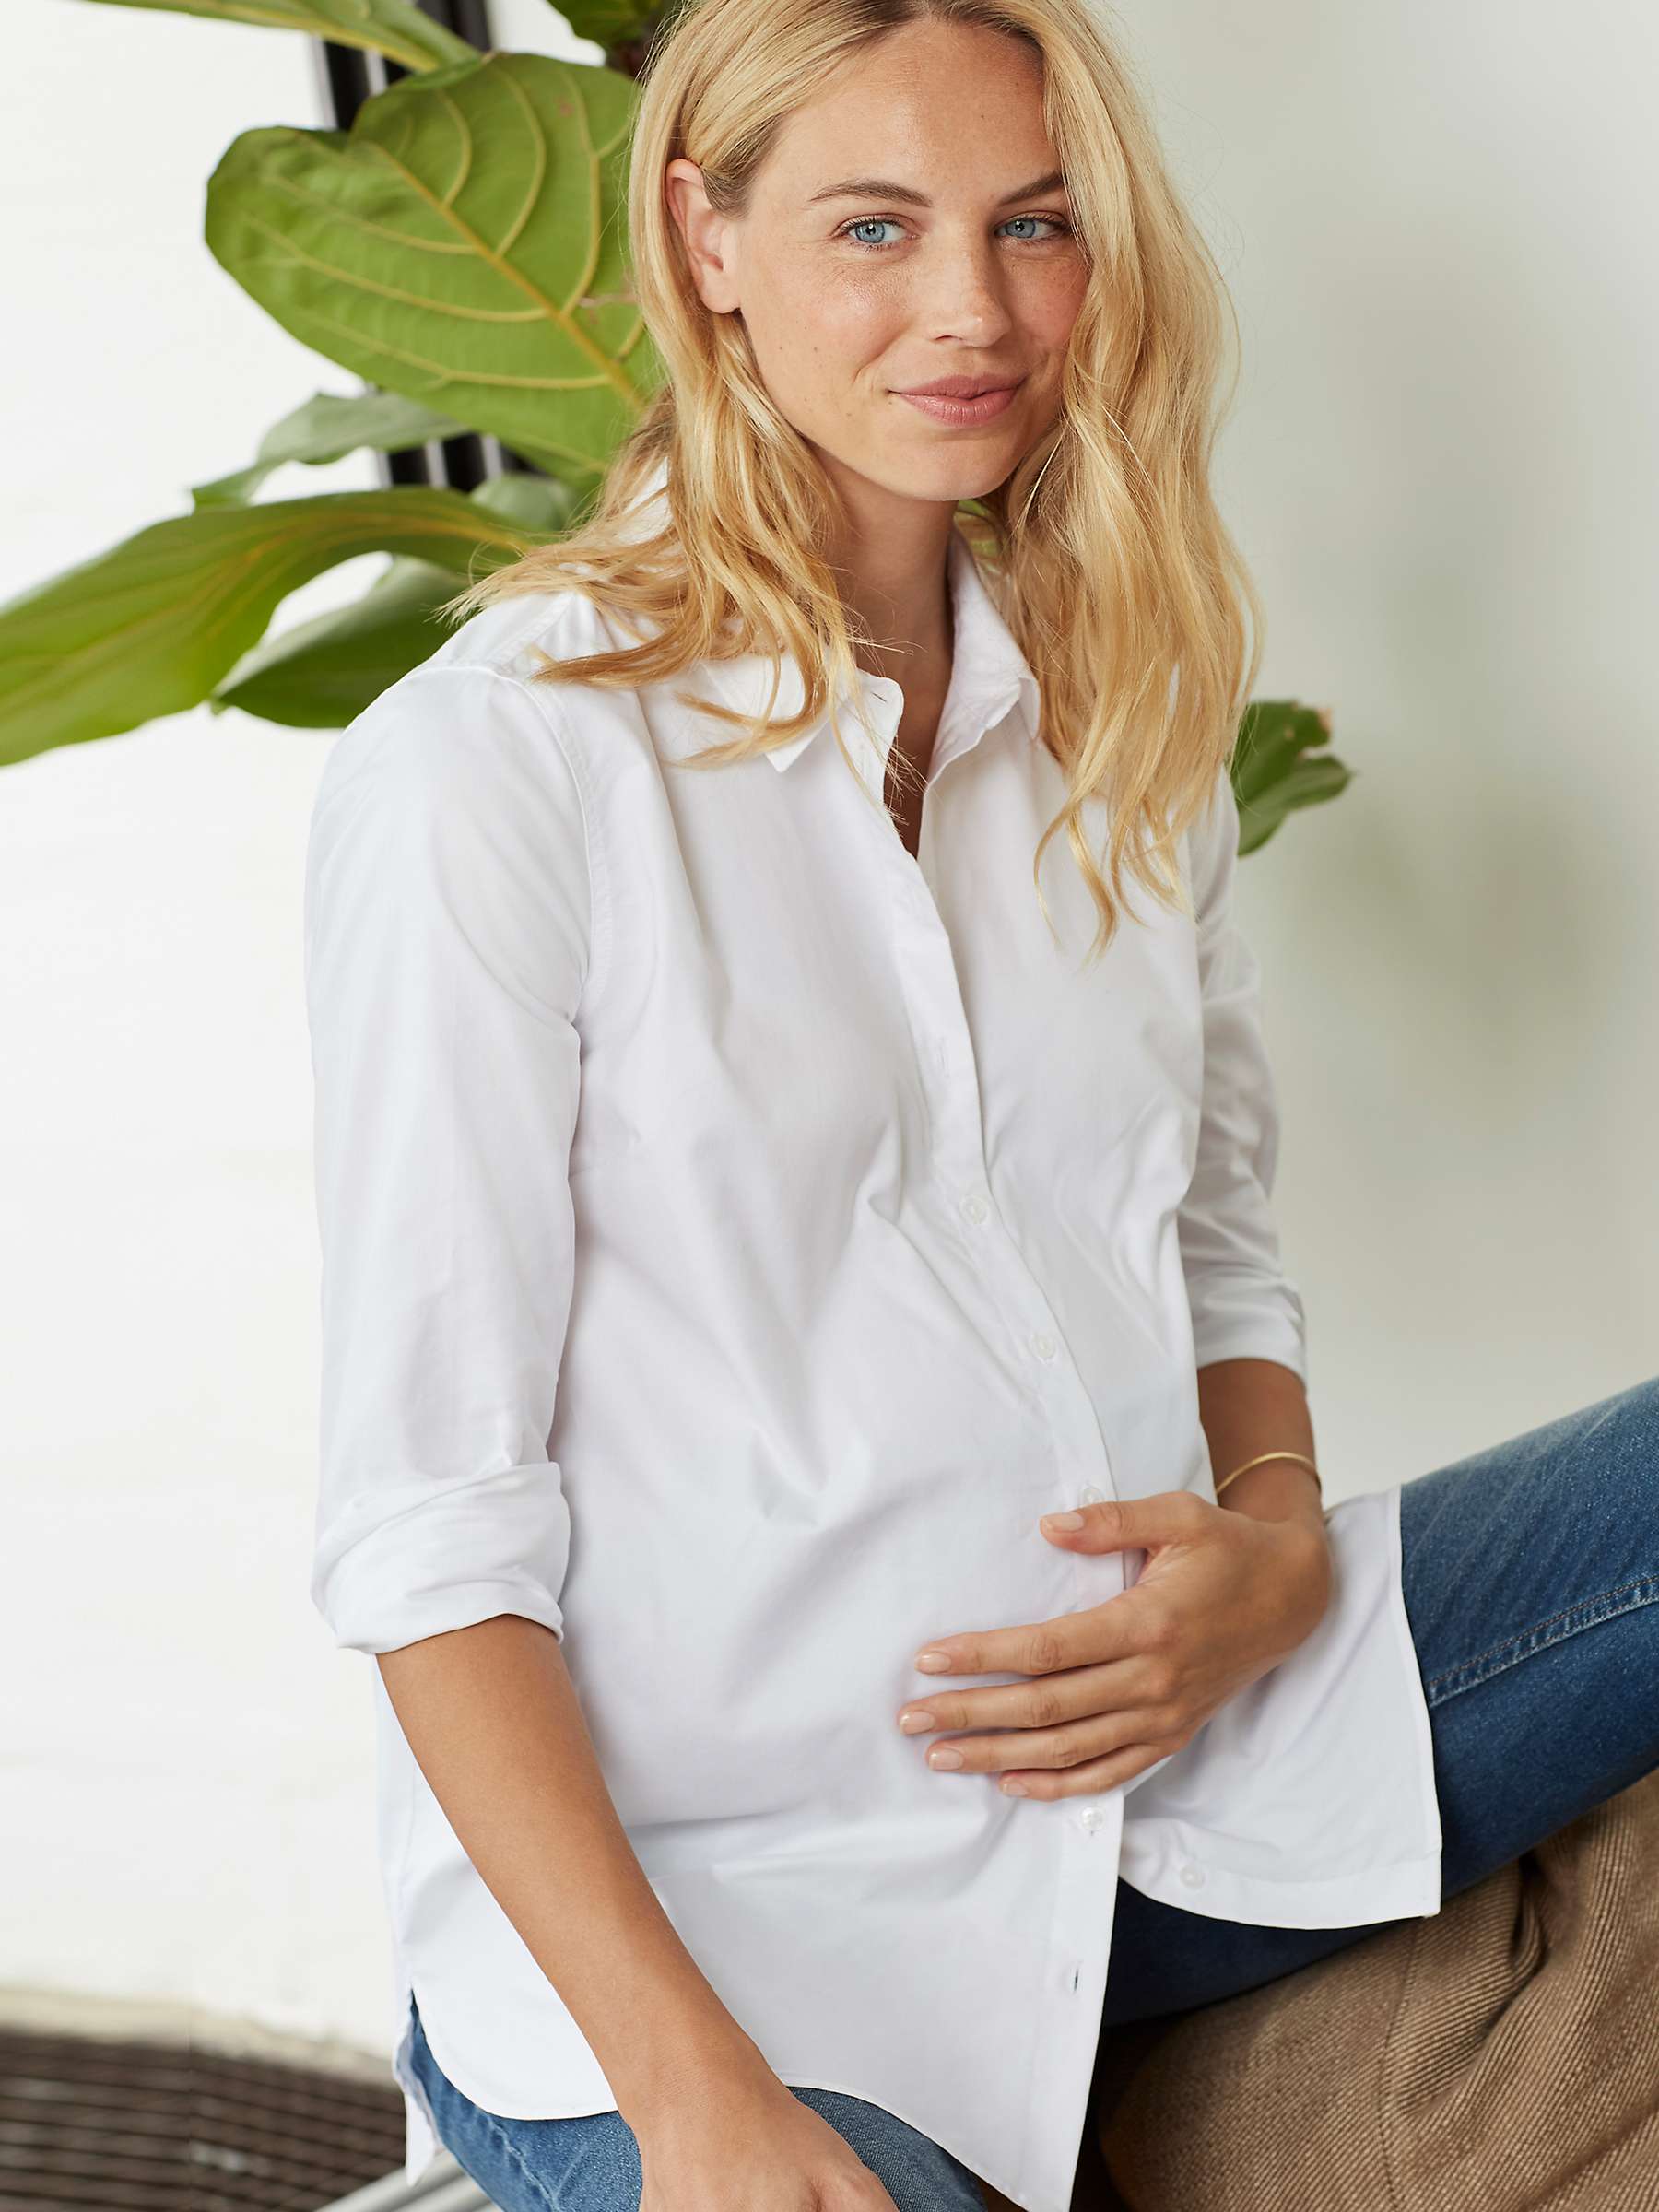 Buy Isabella Oliver Essentials Organic Cotton Maternity Shirt, White Online at johnlewis.com